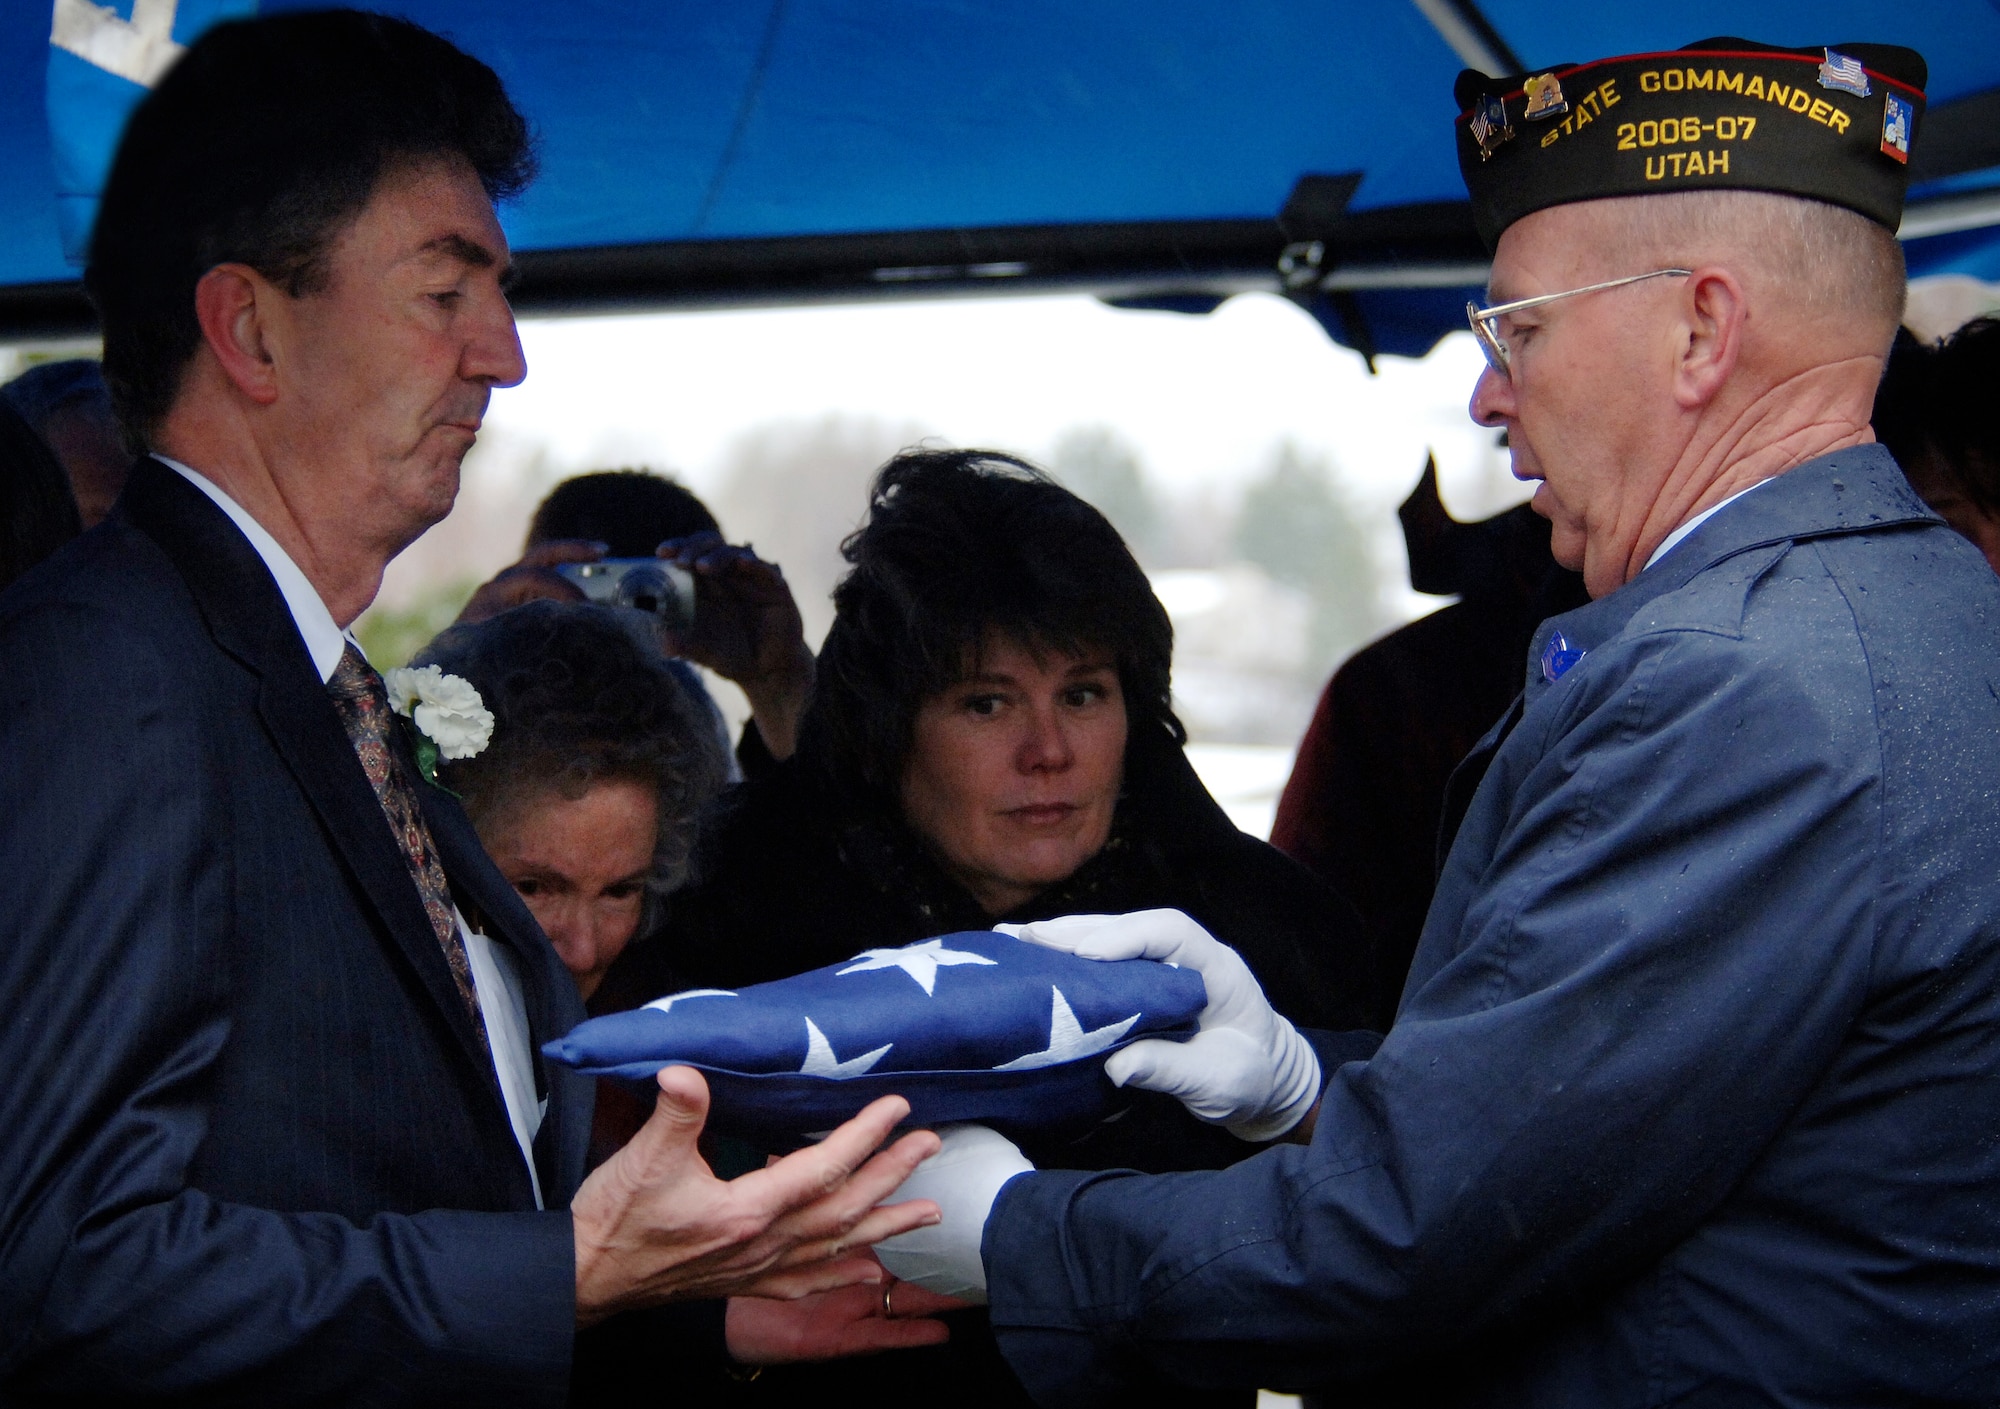 Terry J. Nielsen accepts the traditional folded flag from Utah's Veterans of Foreign War state commander during the interment service for his father Lt. Col. Chase J. Nielsen March 28. Colonel Nielsen was one of the few remaining members of the famed Doolittle Raiders. The members of the Doolittle Raiders reached national acclaim in 1942 after launching the first successful aerial bombing raid on Tokyo, Japan as retaliation for the Japanese bombing of Pearl Harbor, Hawaii in December of 1941. (U.S. Air Force photo/Efrain Gonzalez)